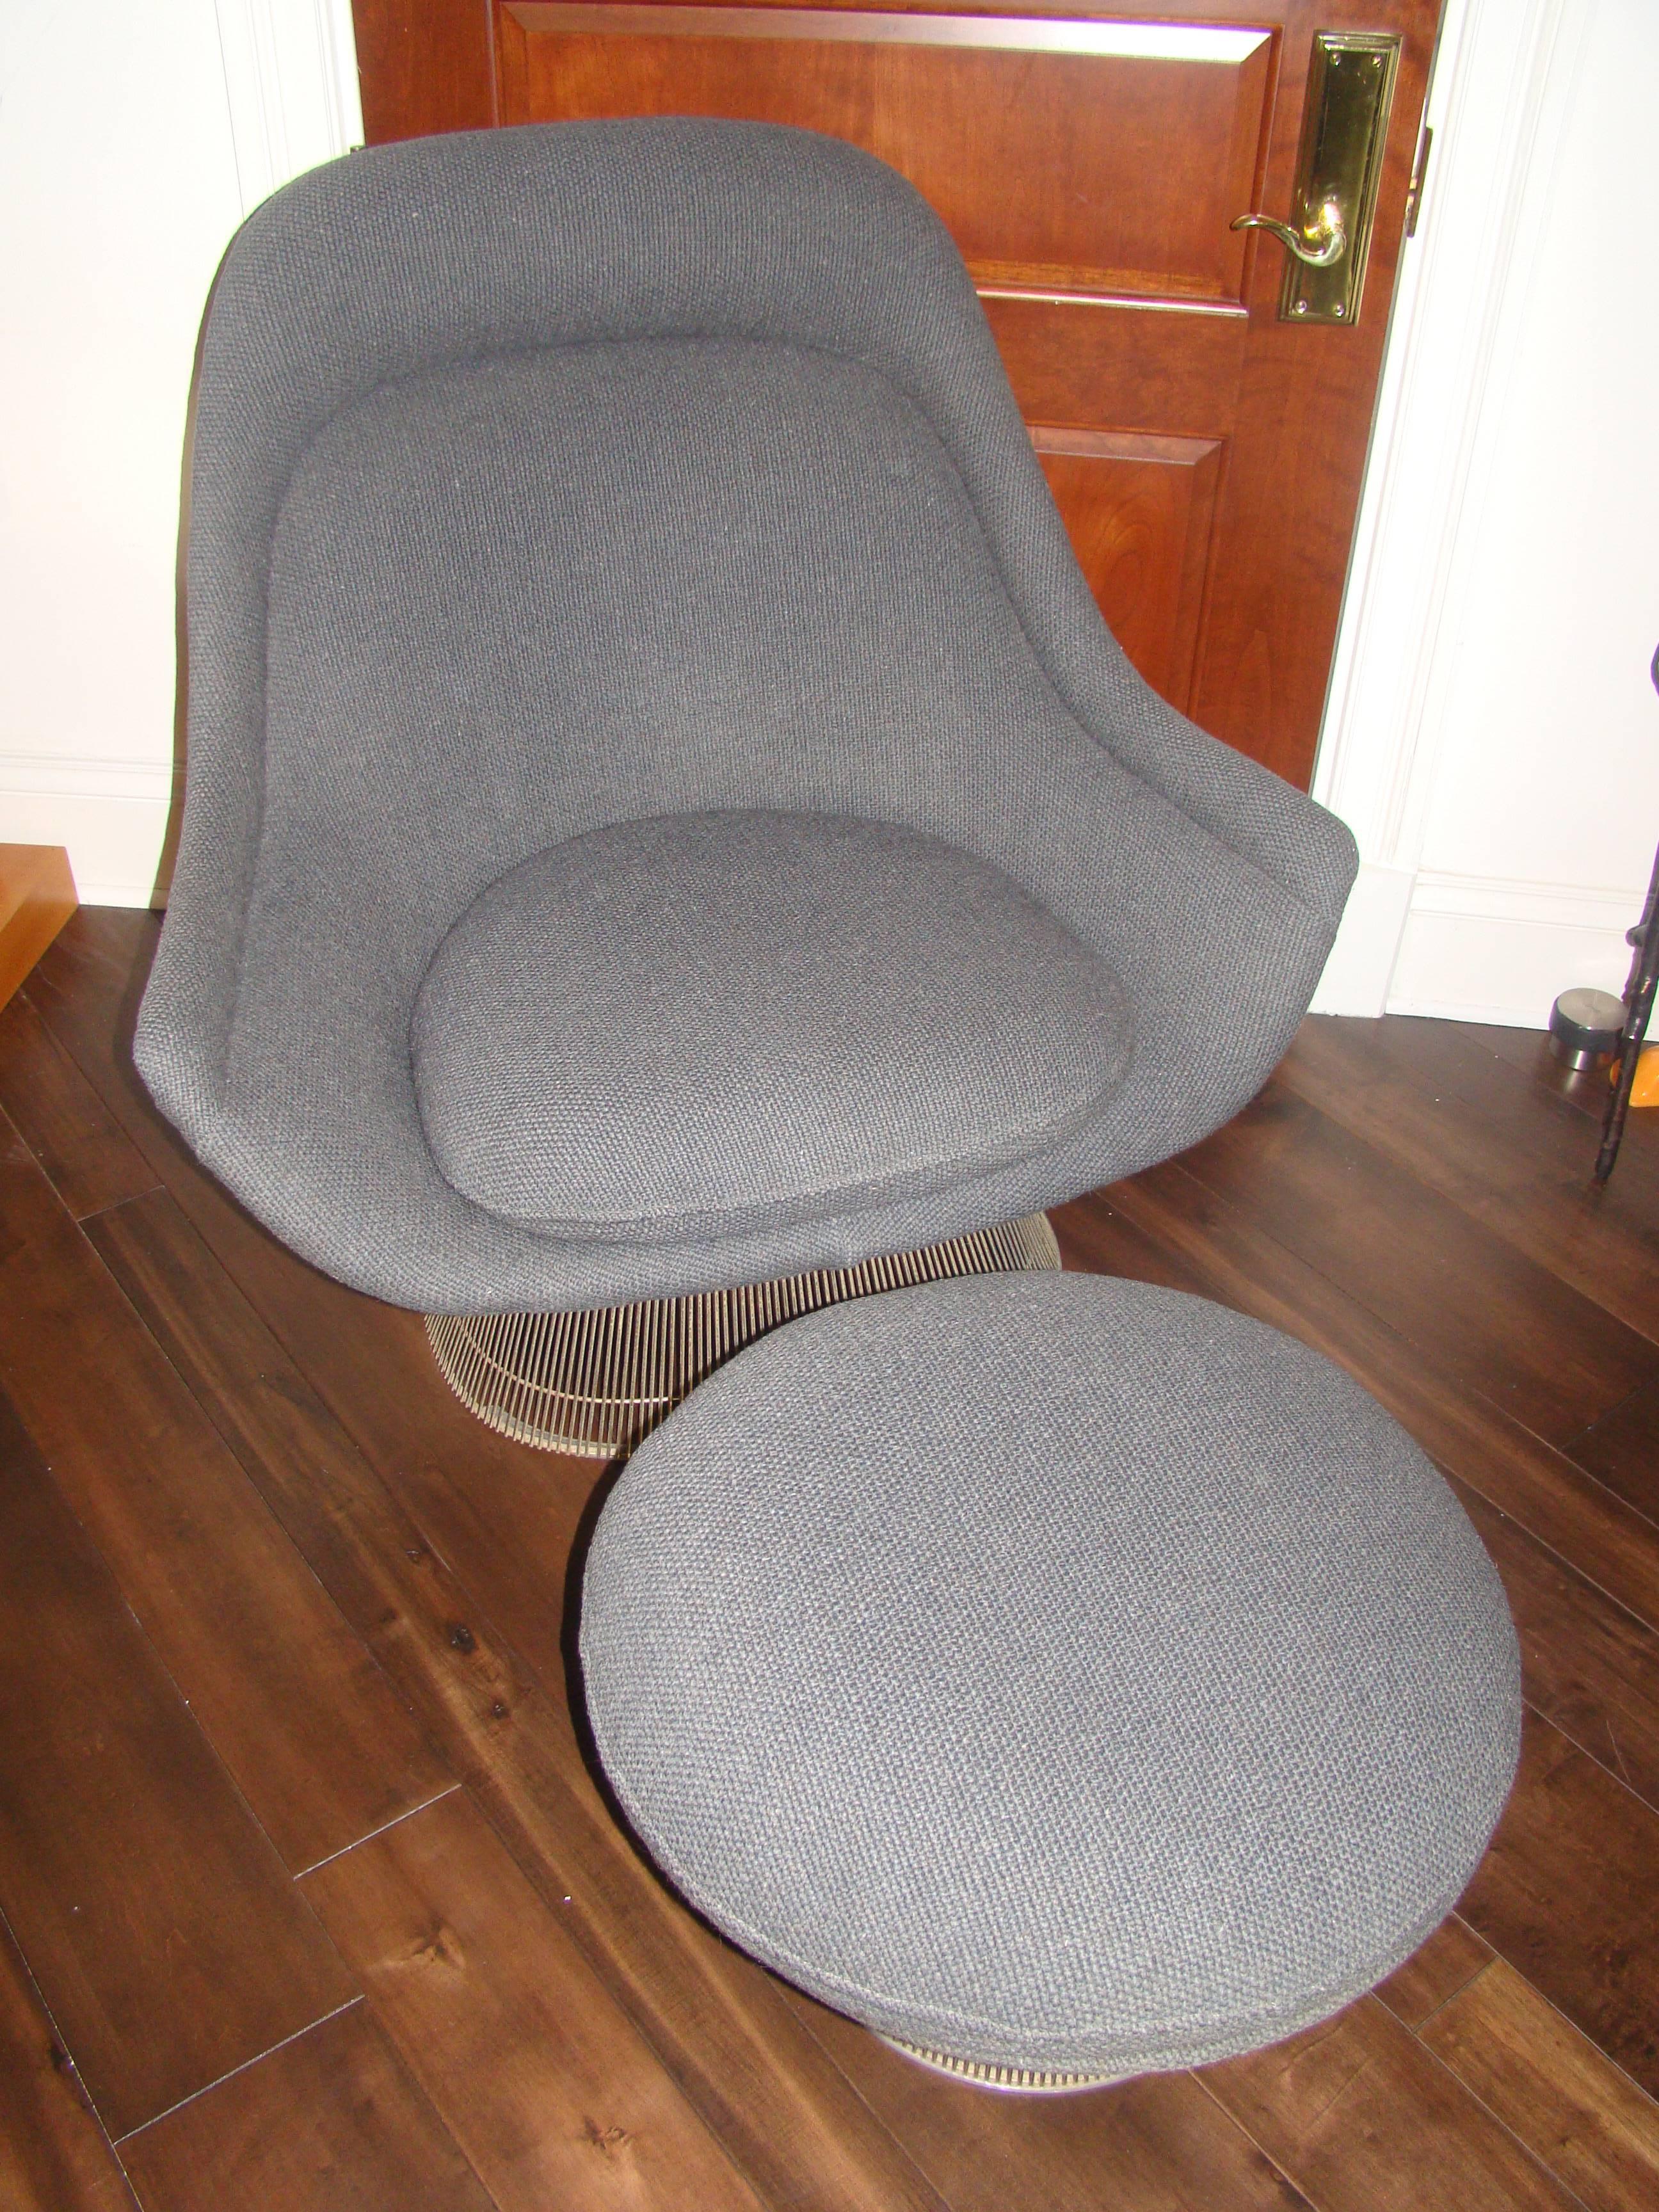 American Knoll Warren Platner Throne Easy Chair and Ottoman Lounge